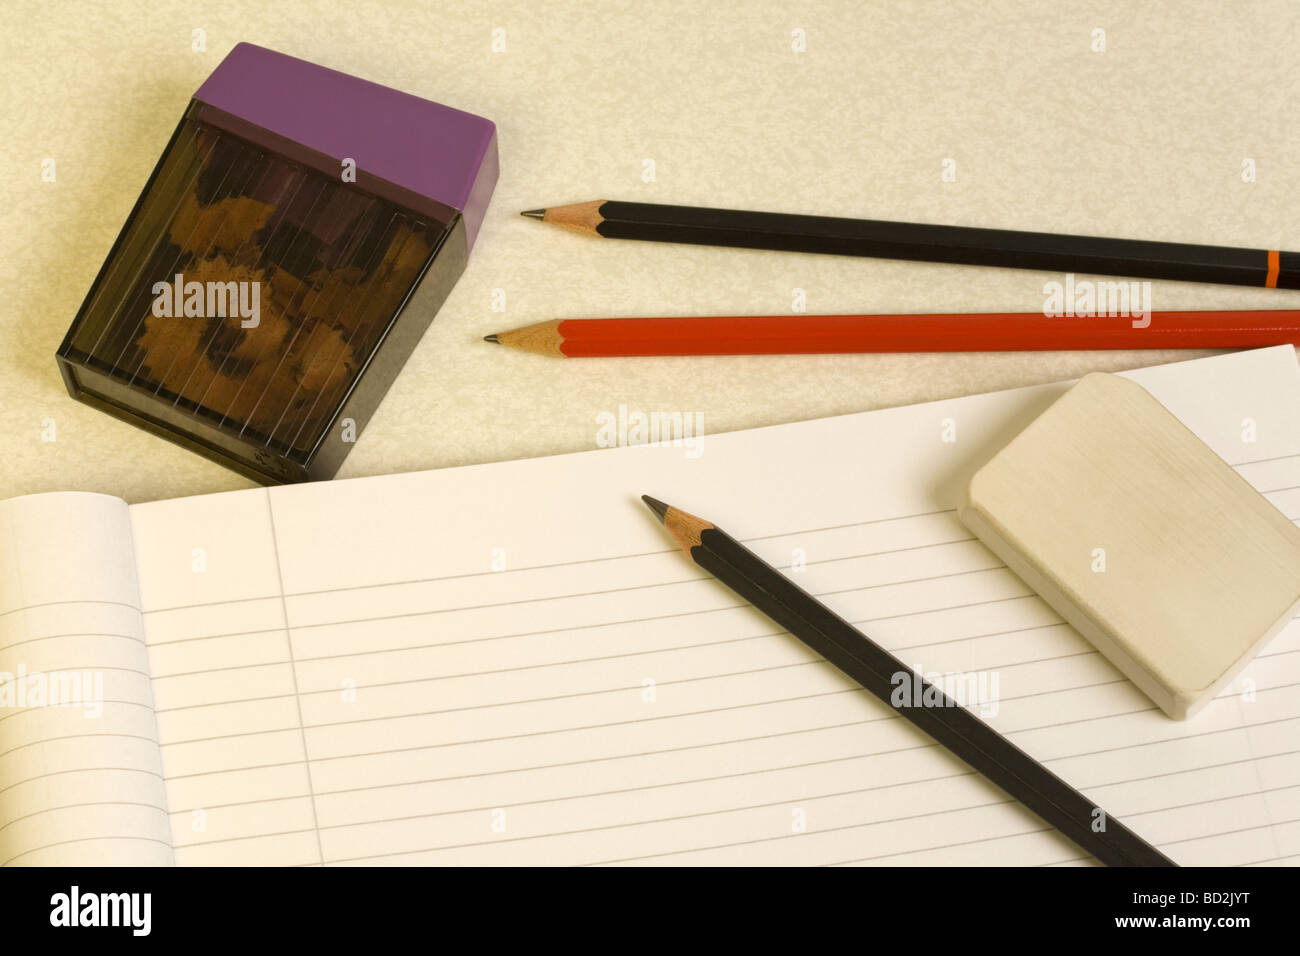 close up photograph of a clean white sketch pad and artists pencils Stock  Photo - Alamy